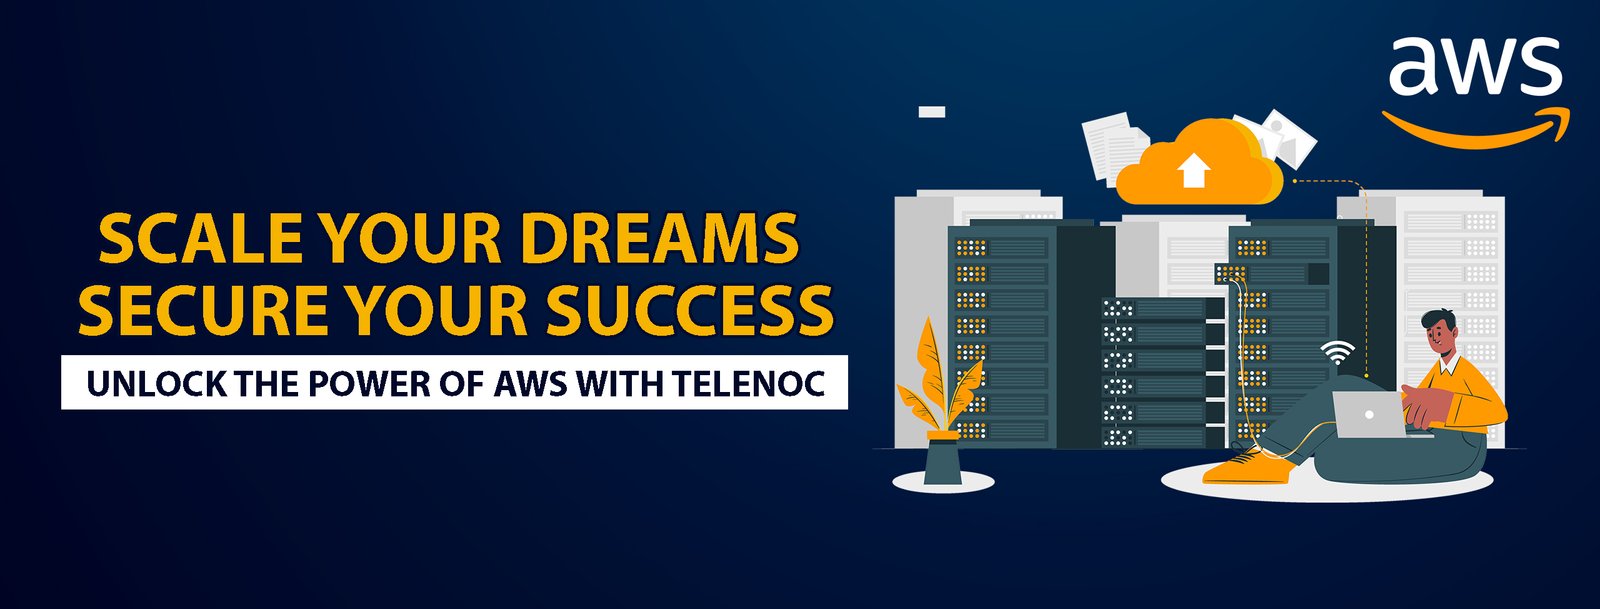 if You need aws sevices in KSA, then contact telenoc which are leading and authorized aws partner in saudi arabia providing cloud solution ans services aws server, aws web hosting, aws ec2, aws devops, aws database services. for pricing contact us.